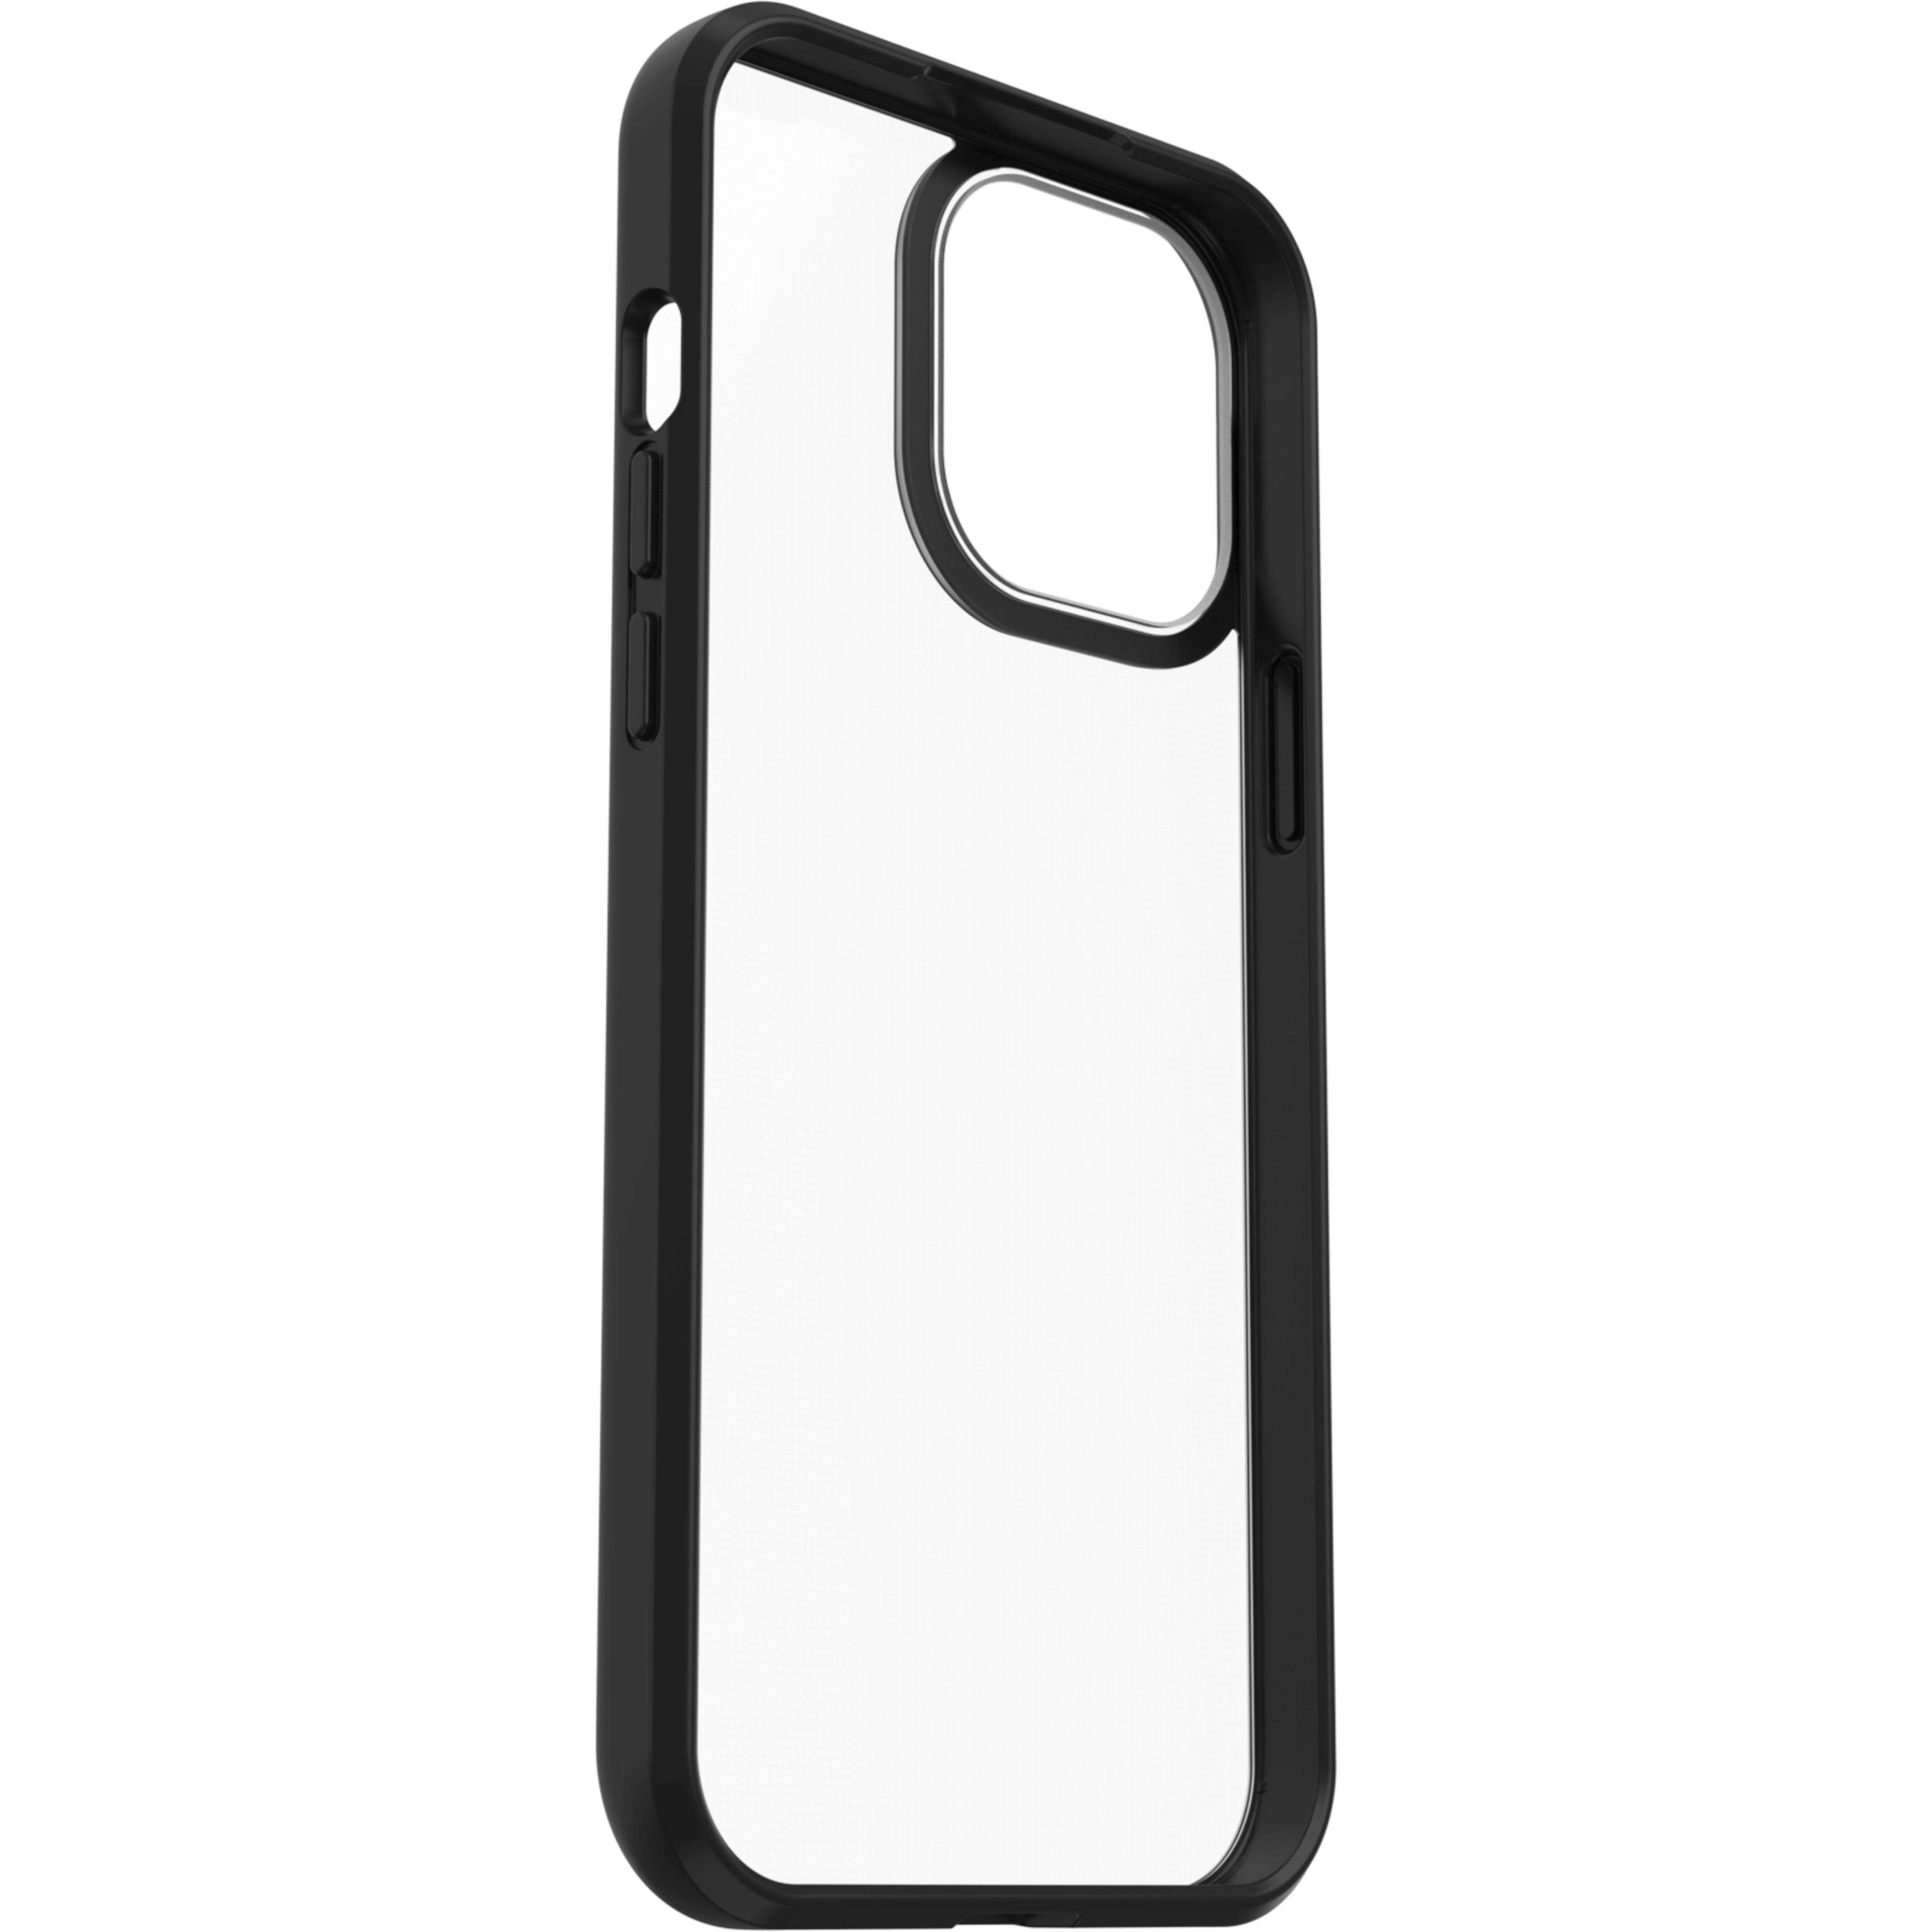 Pro 13 React, Transparent iPhone Apple, Max, / Schwarz OTTERBOX Backcover,